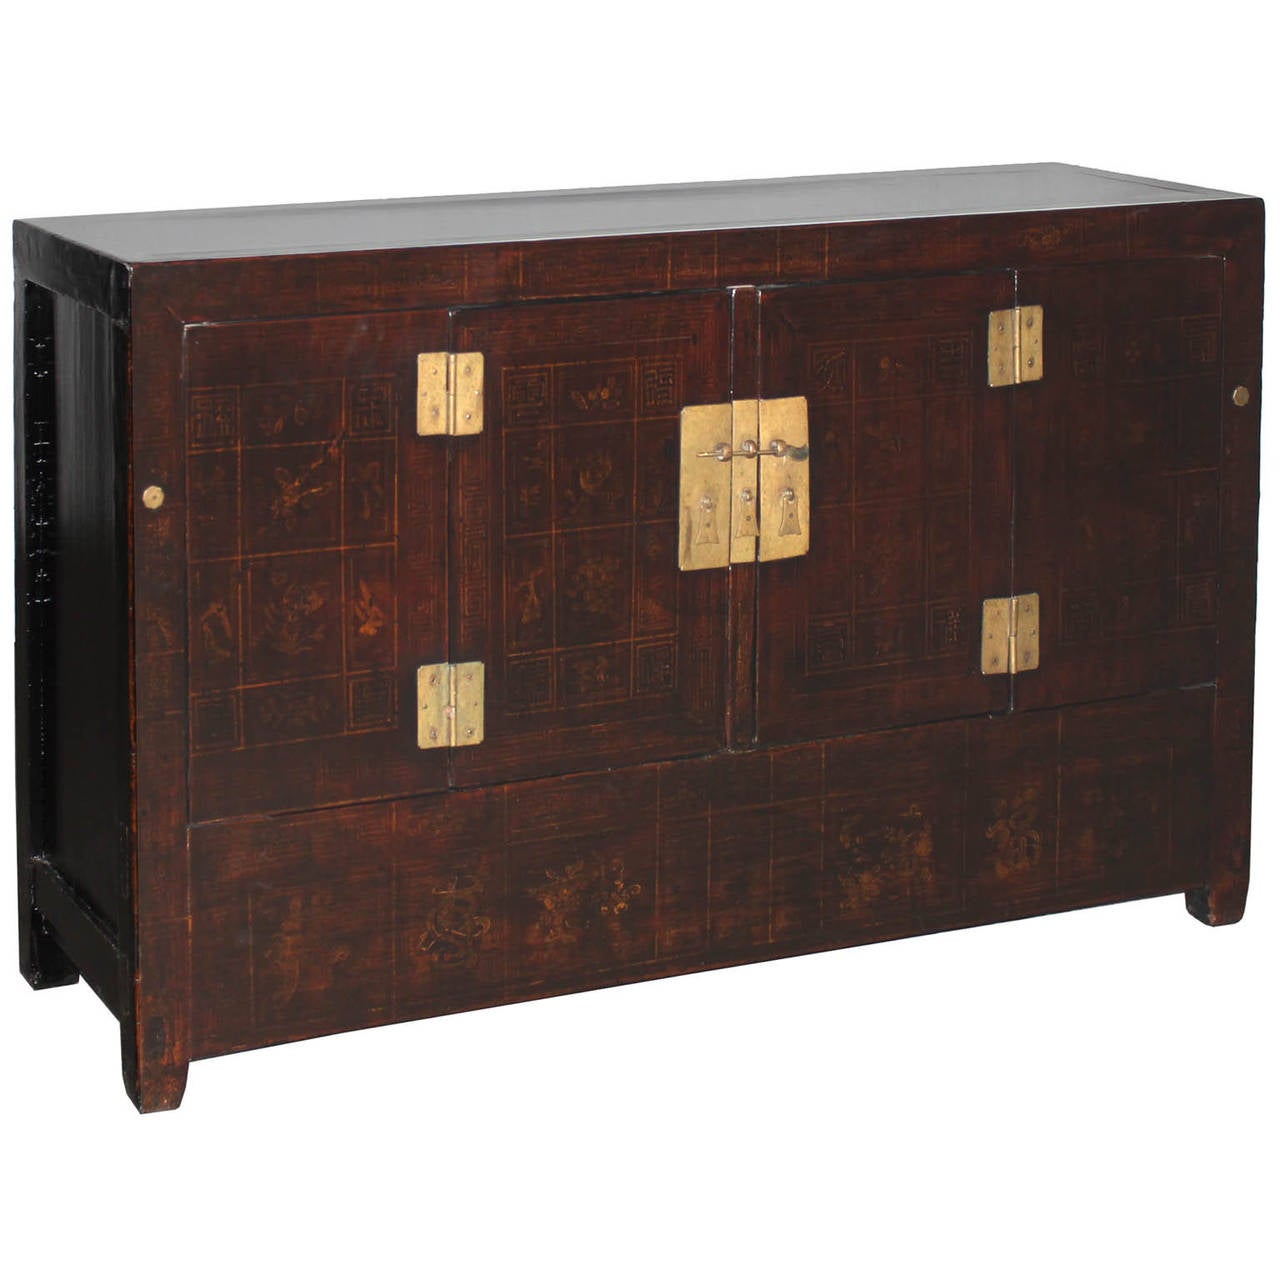 Wedding sideboard with hand-painted symbols for prosperity and good wishes. With bi-fold doors and removable center bar for easy interior access. Use in the dining room as a sideboard, or in the living room behind a sofa. Dongbei, China circa 1880s.